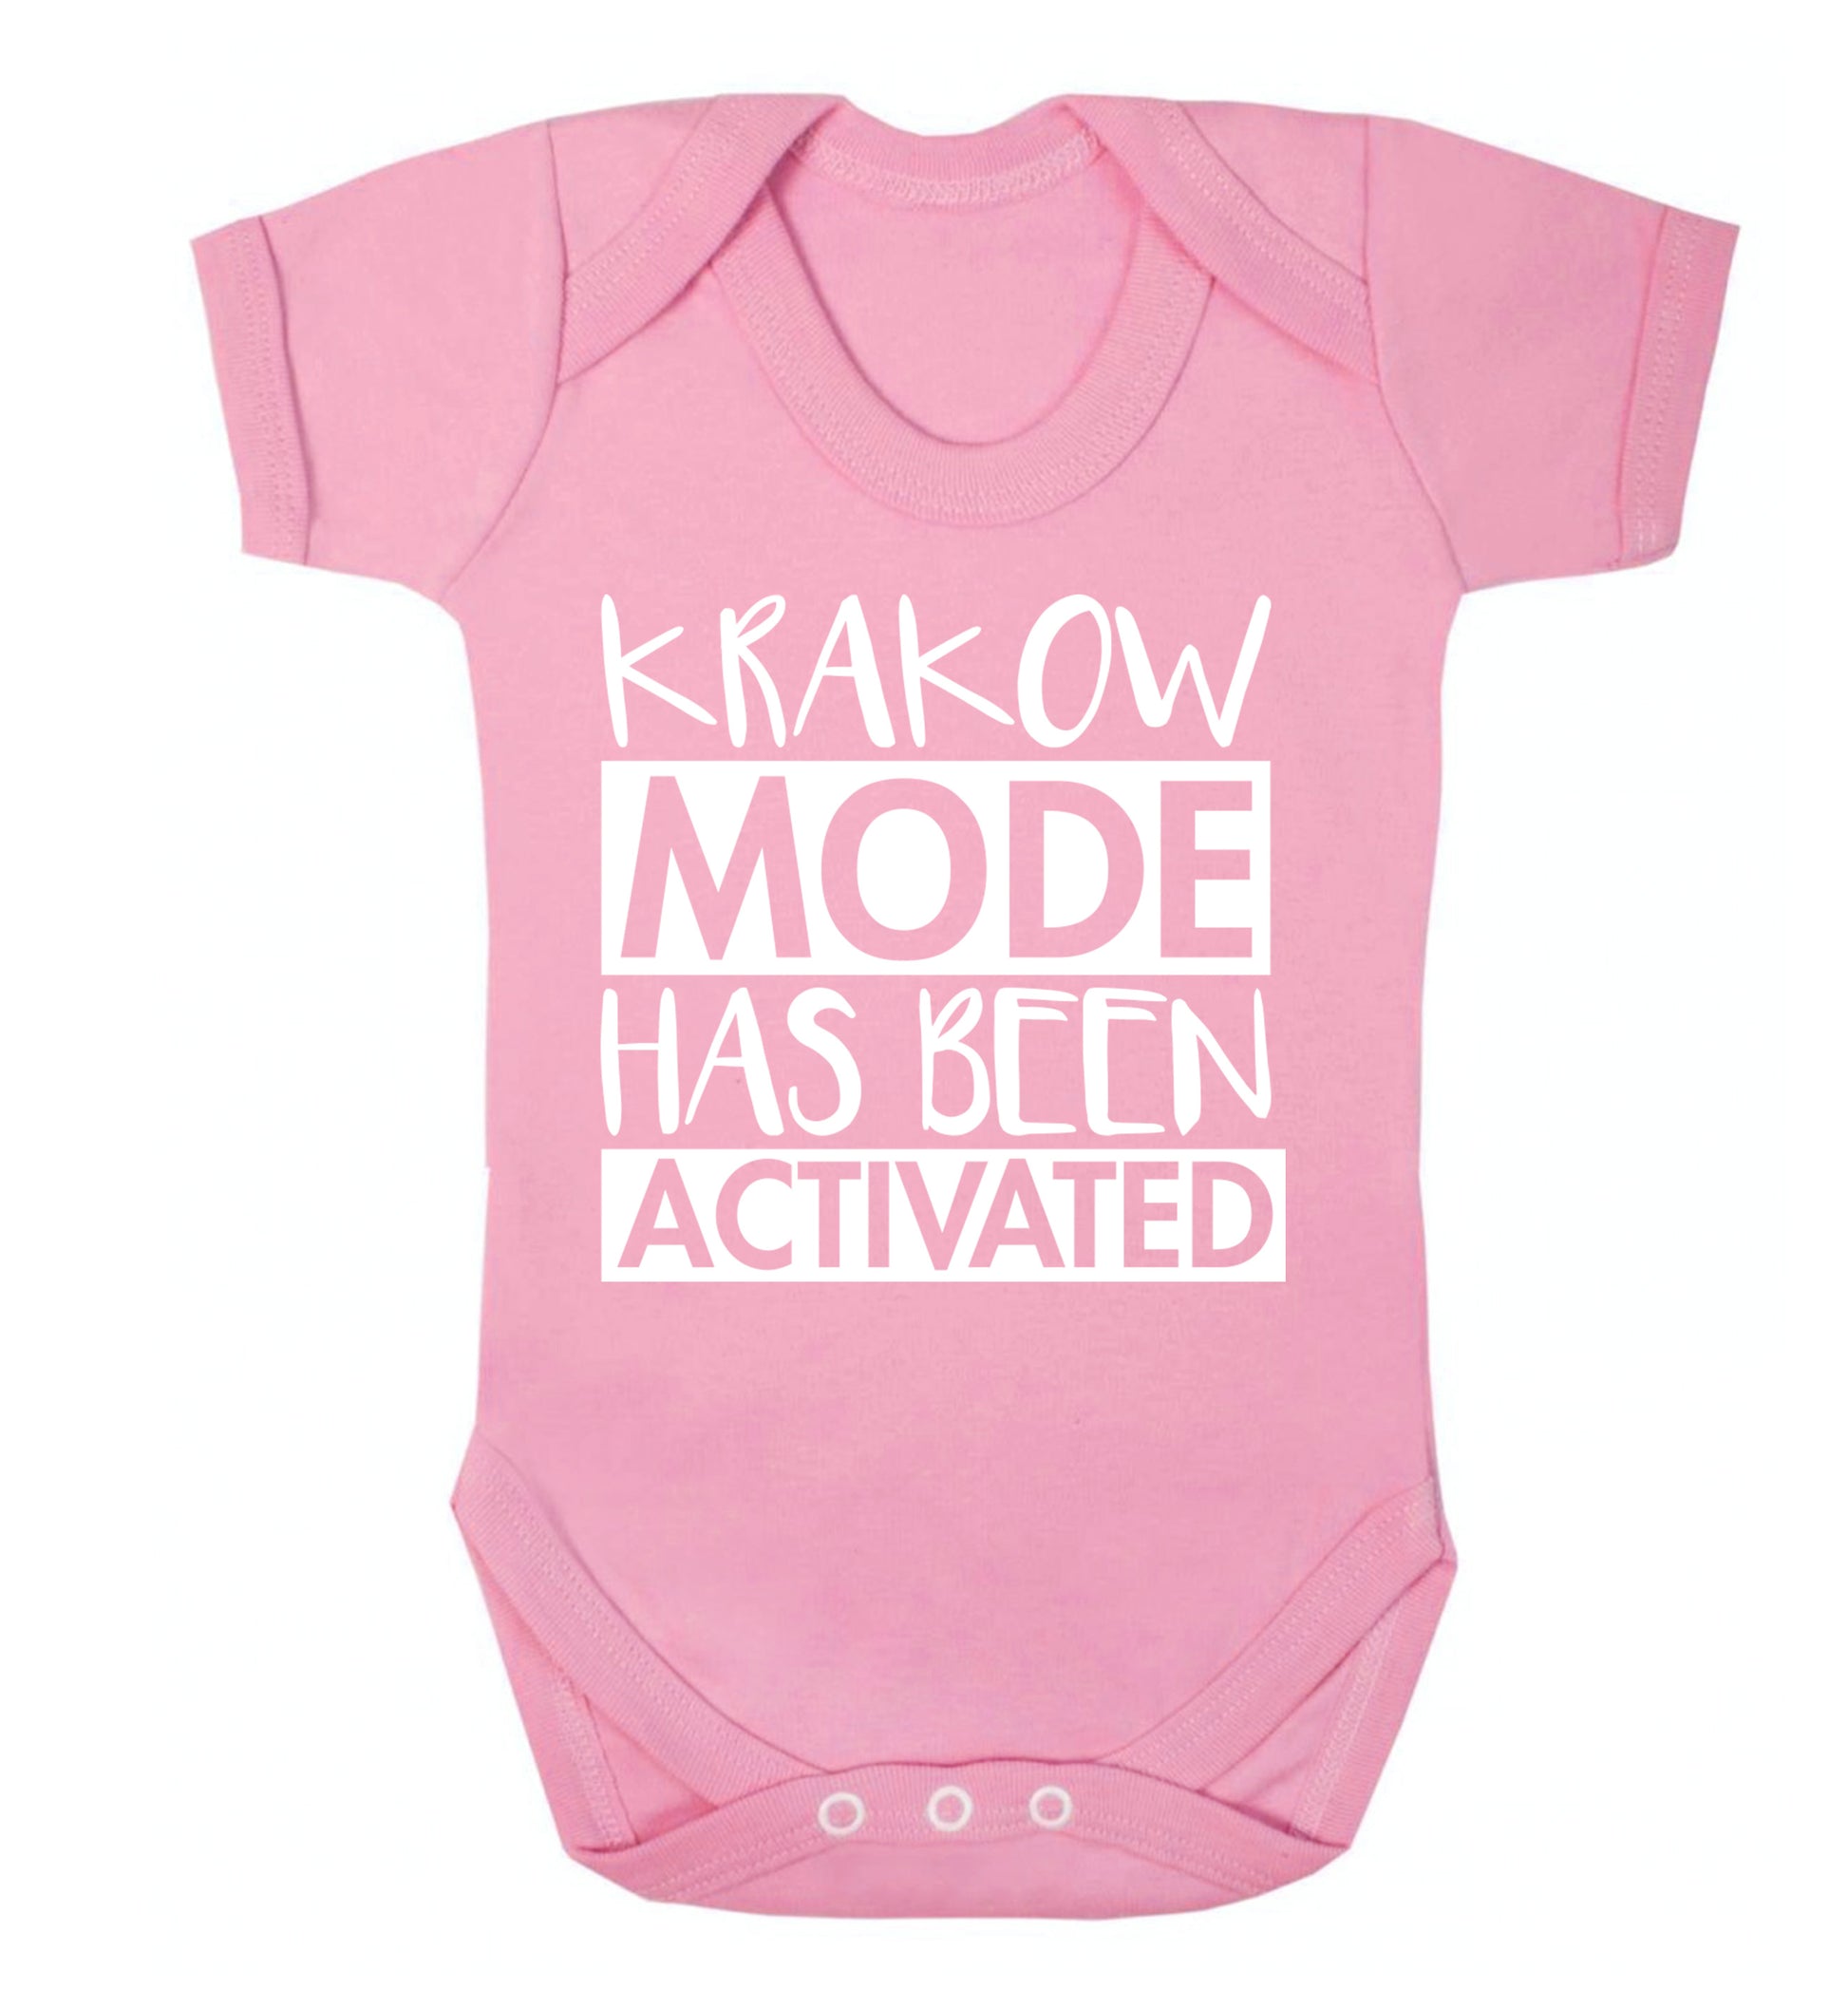 Krakow mode has been activated Baby Vest pale pink 18-24 months